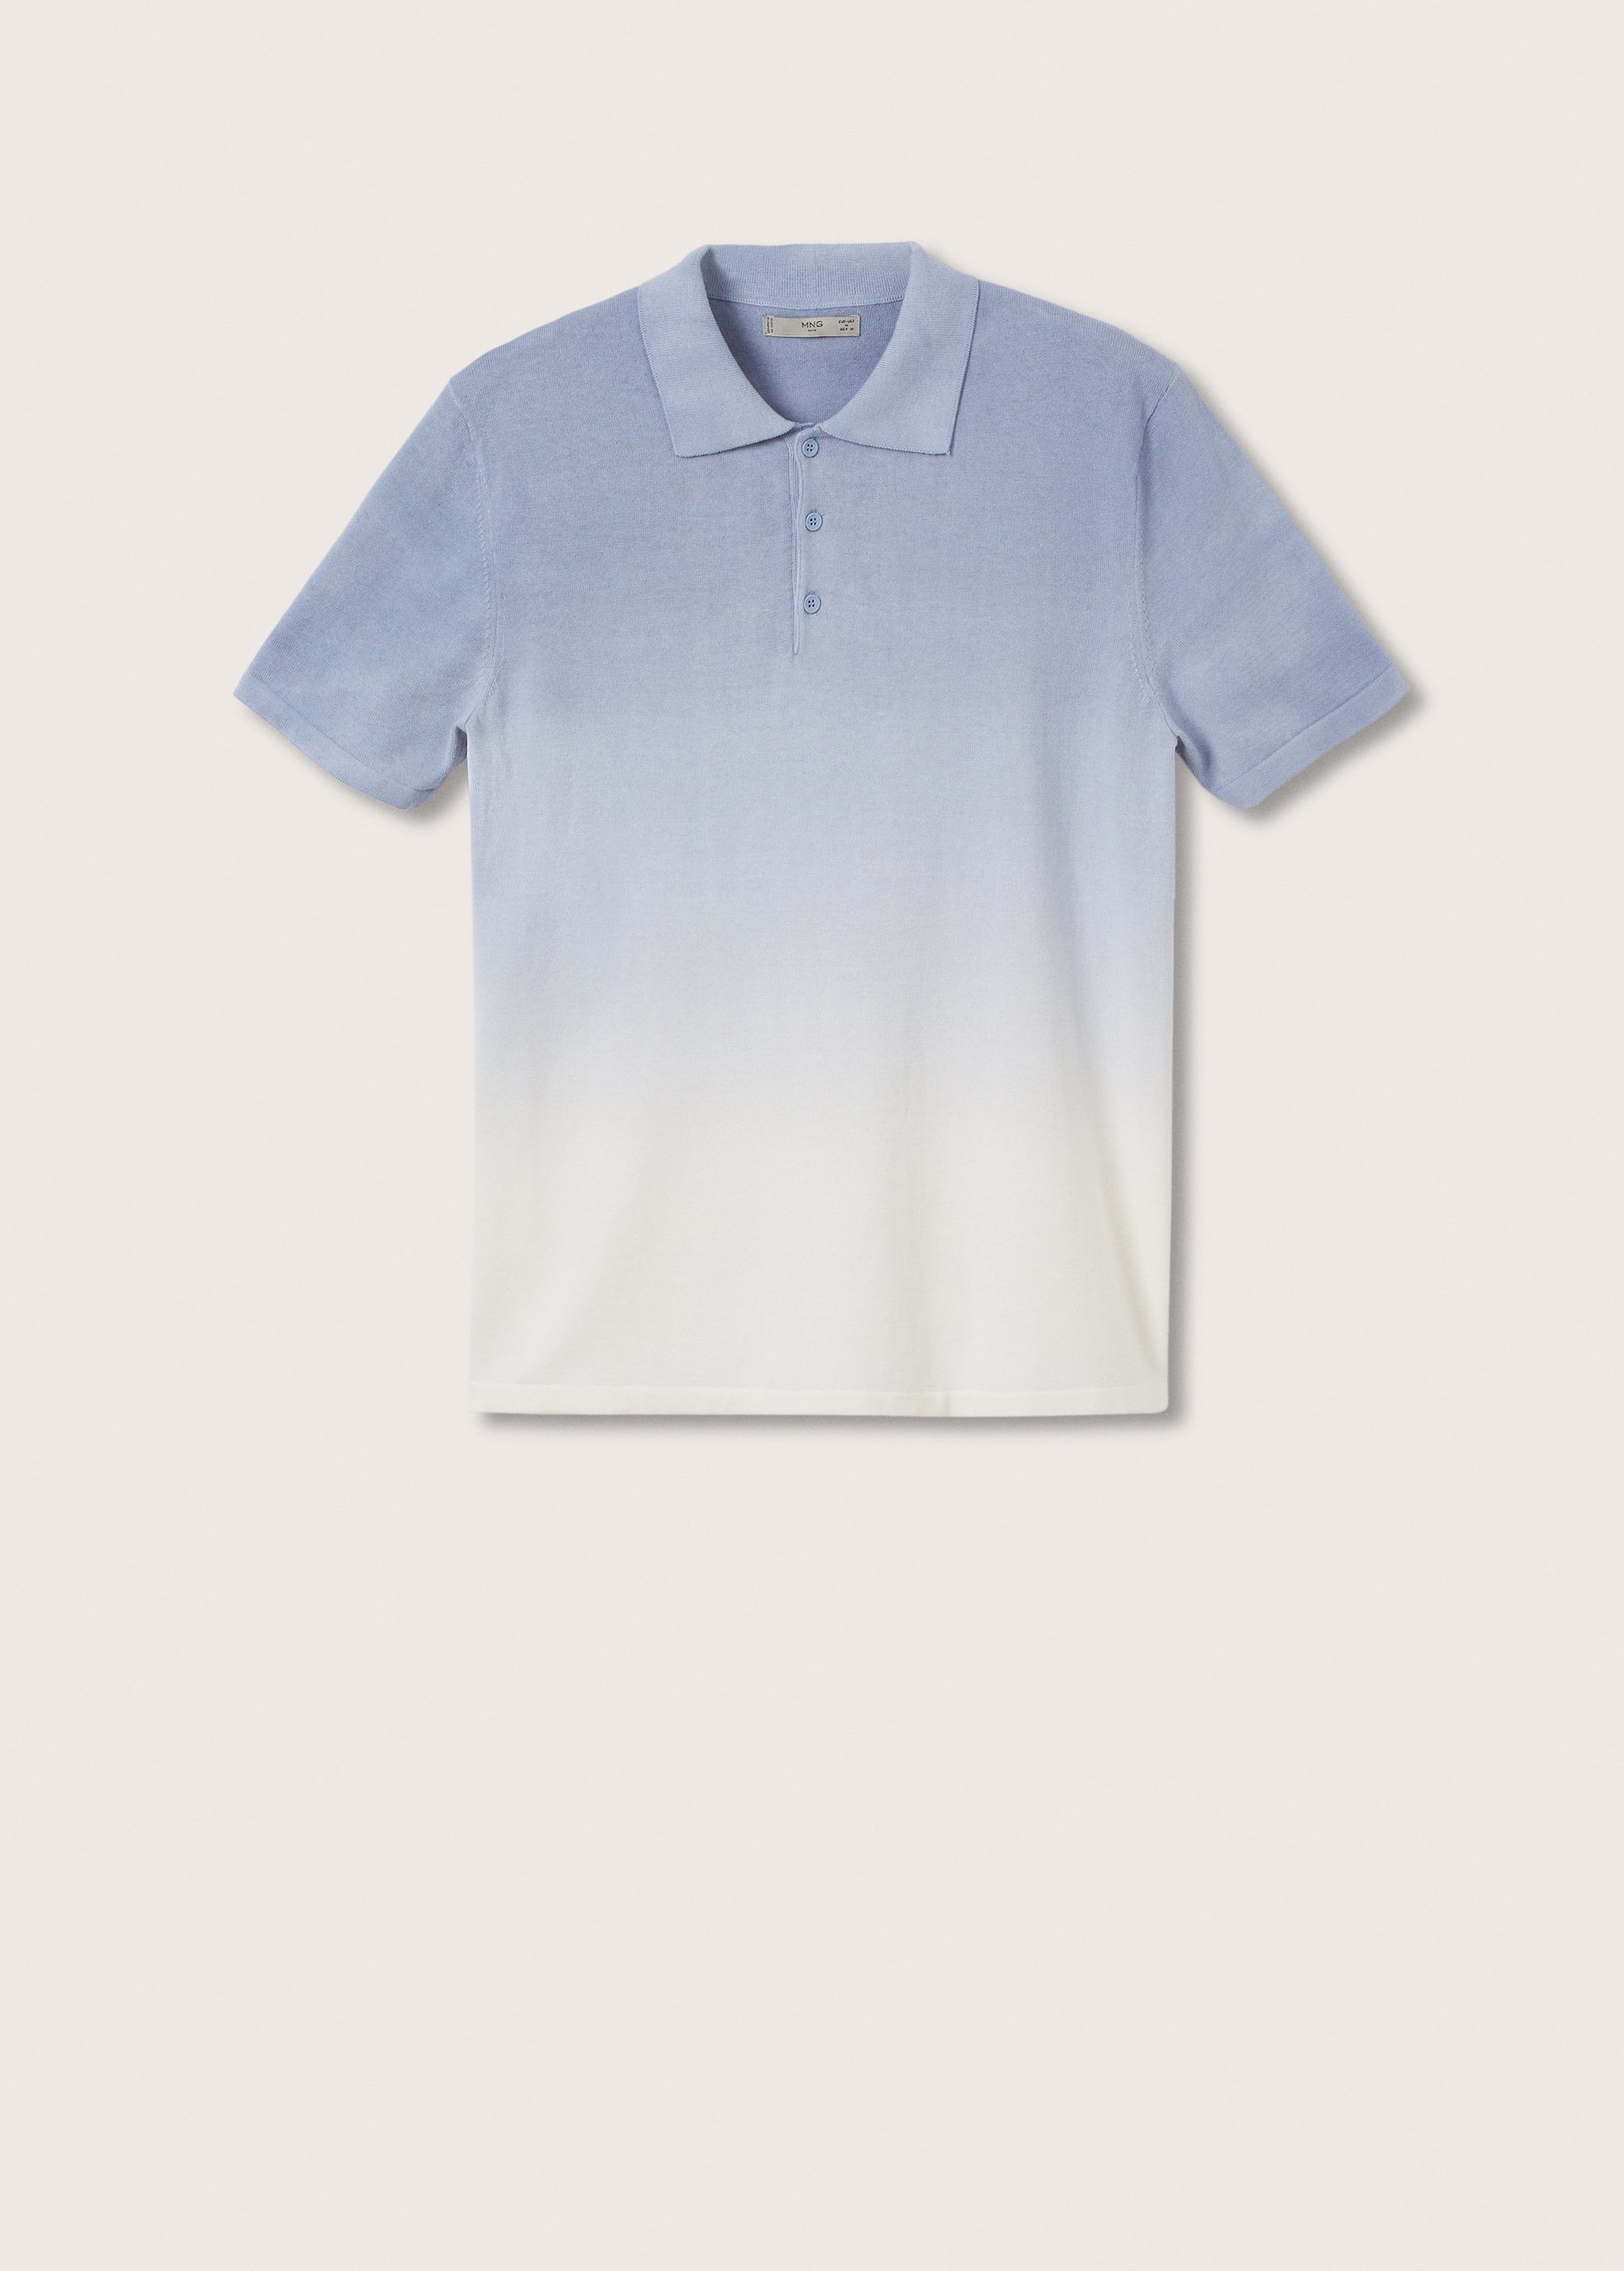 Dyed knit polo shirt - Article without model